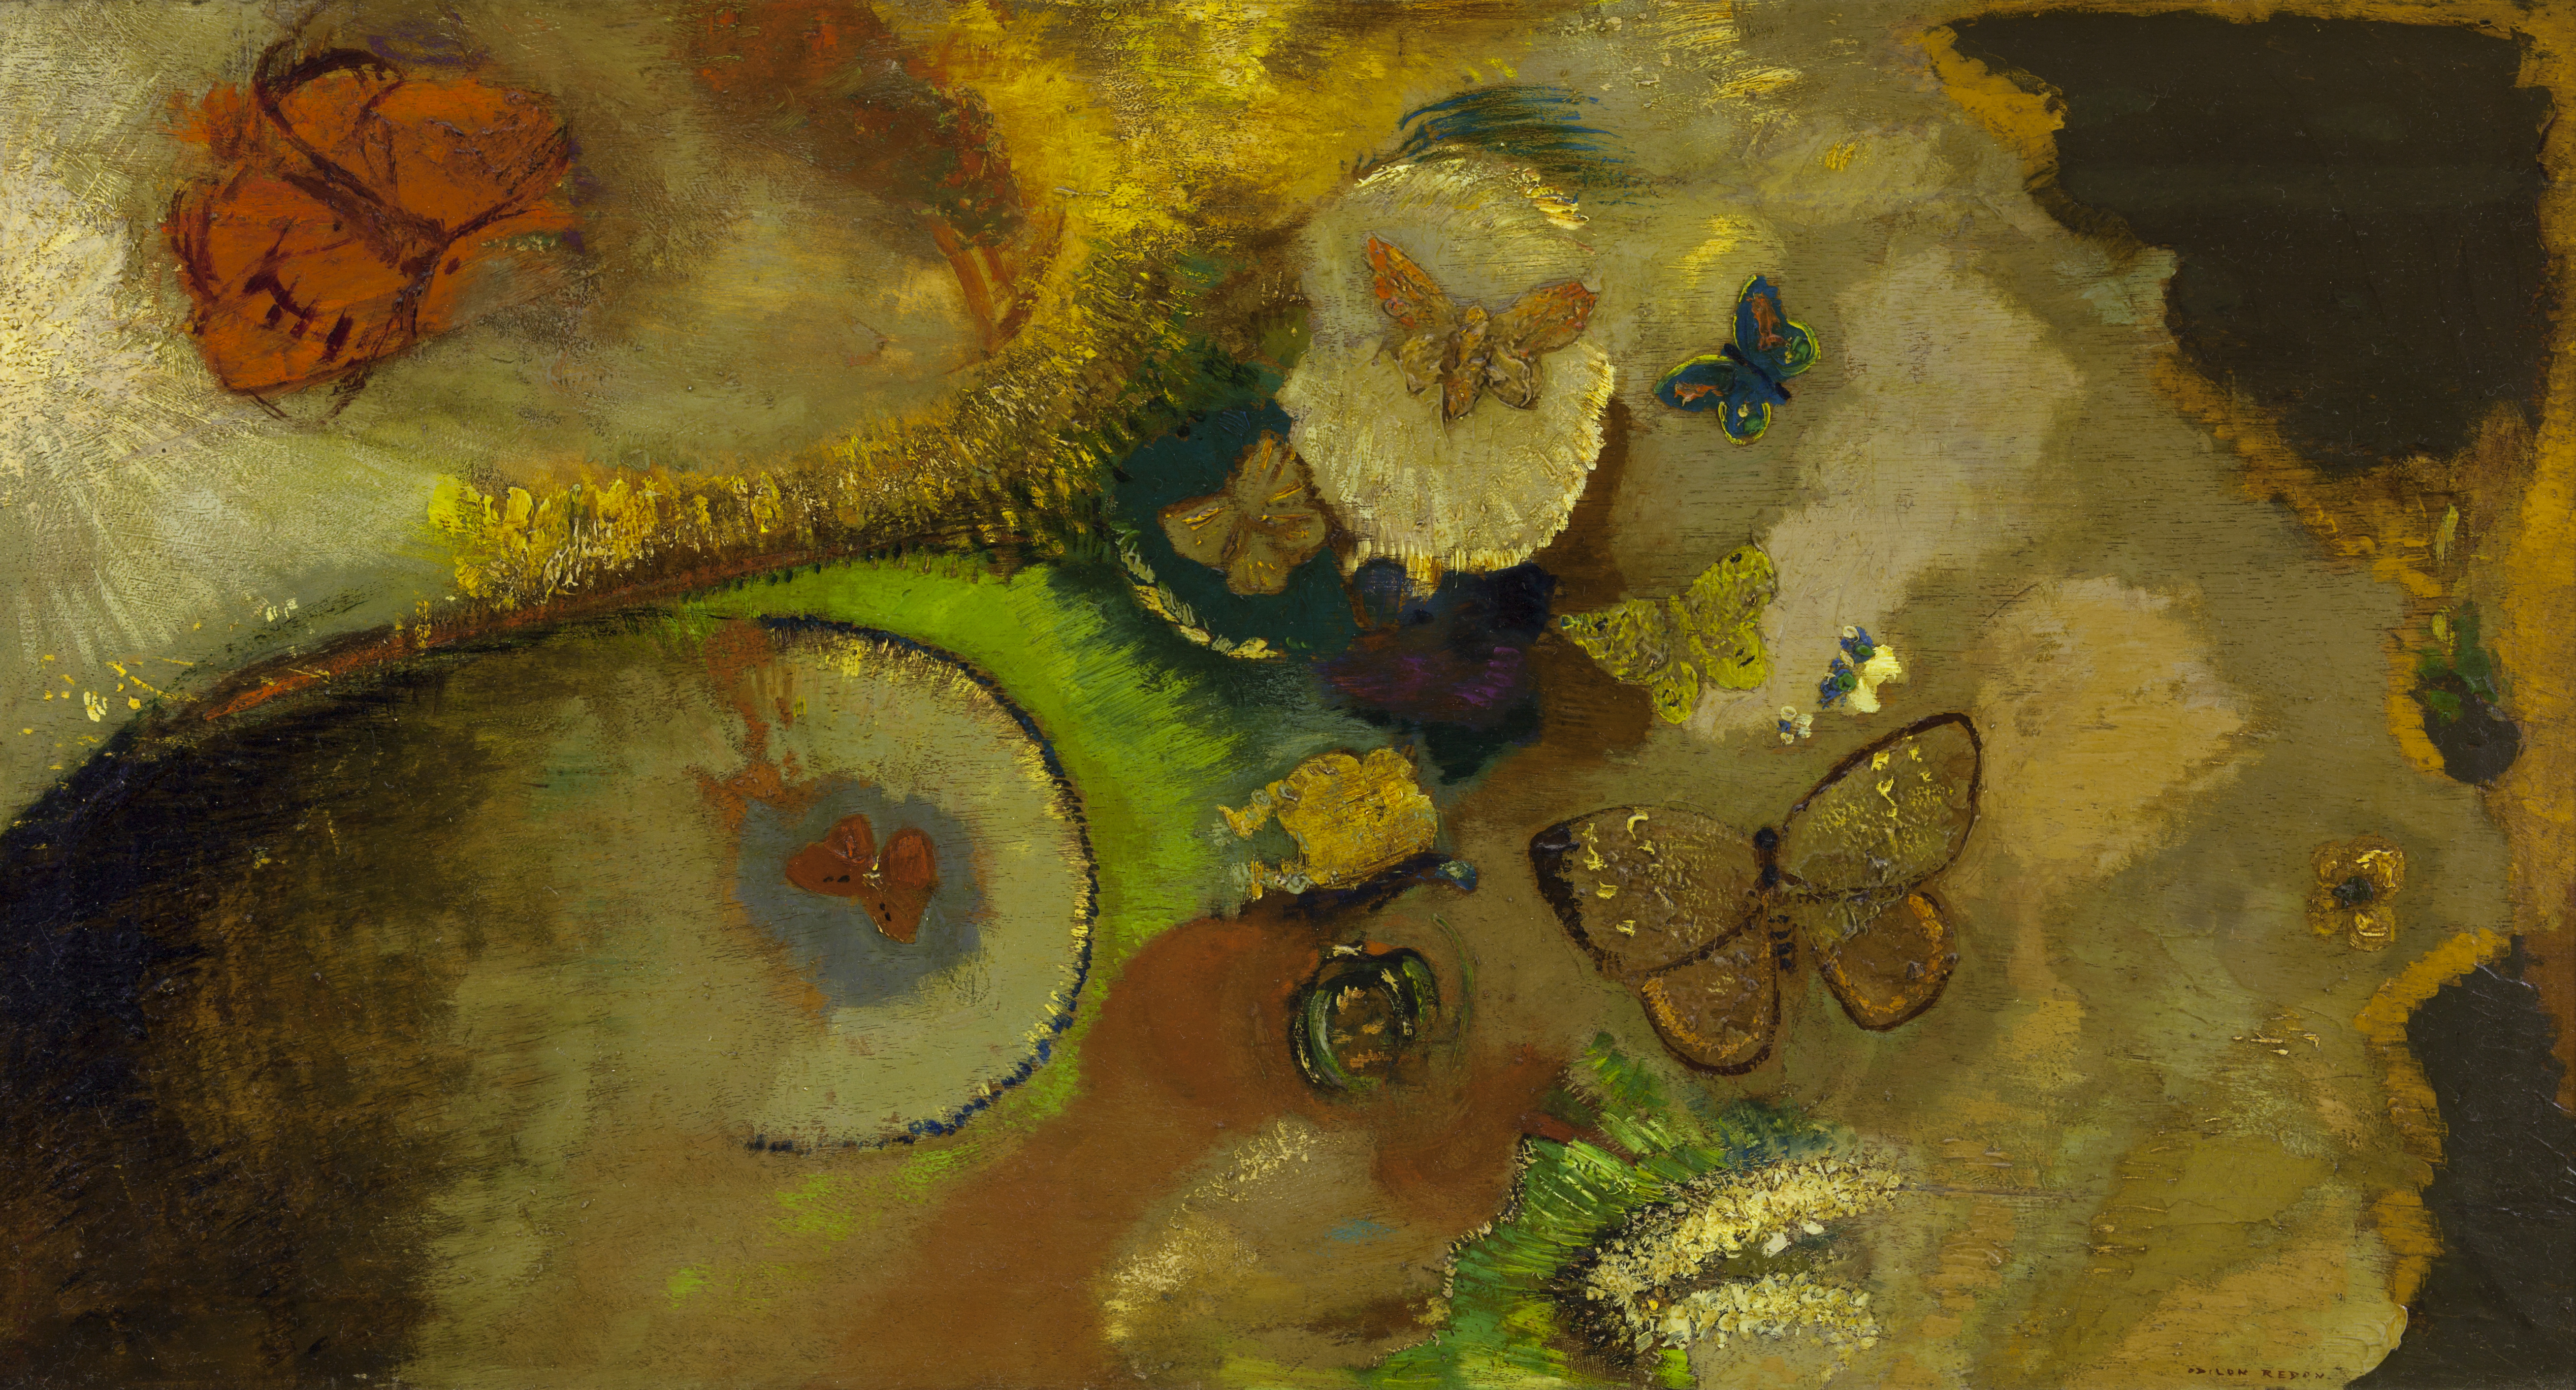 Odilon Redon, ‘The Dream of Butterflies,’ 1910-1915. Oil on canvas. Framed: 24 by 37.25in. The New Orleans Museum of Art, The Muriel Bultman Frances Collection, 86.284